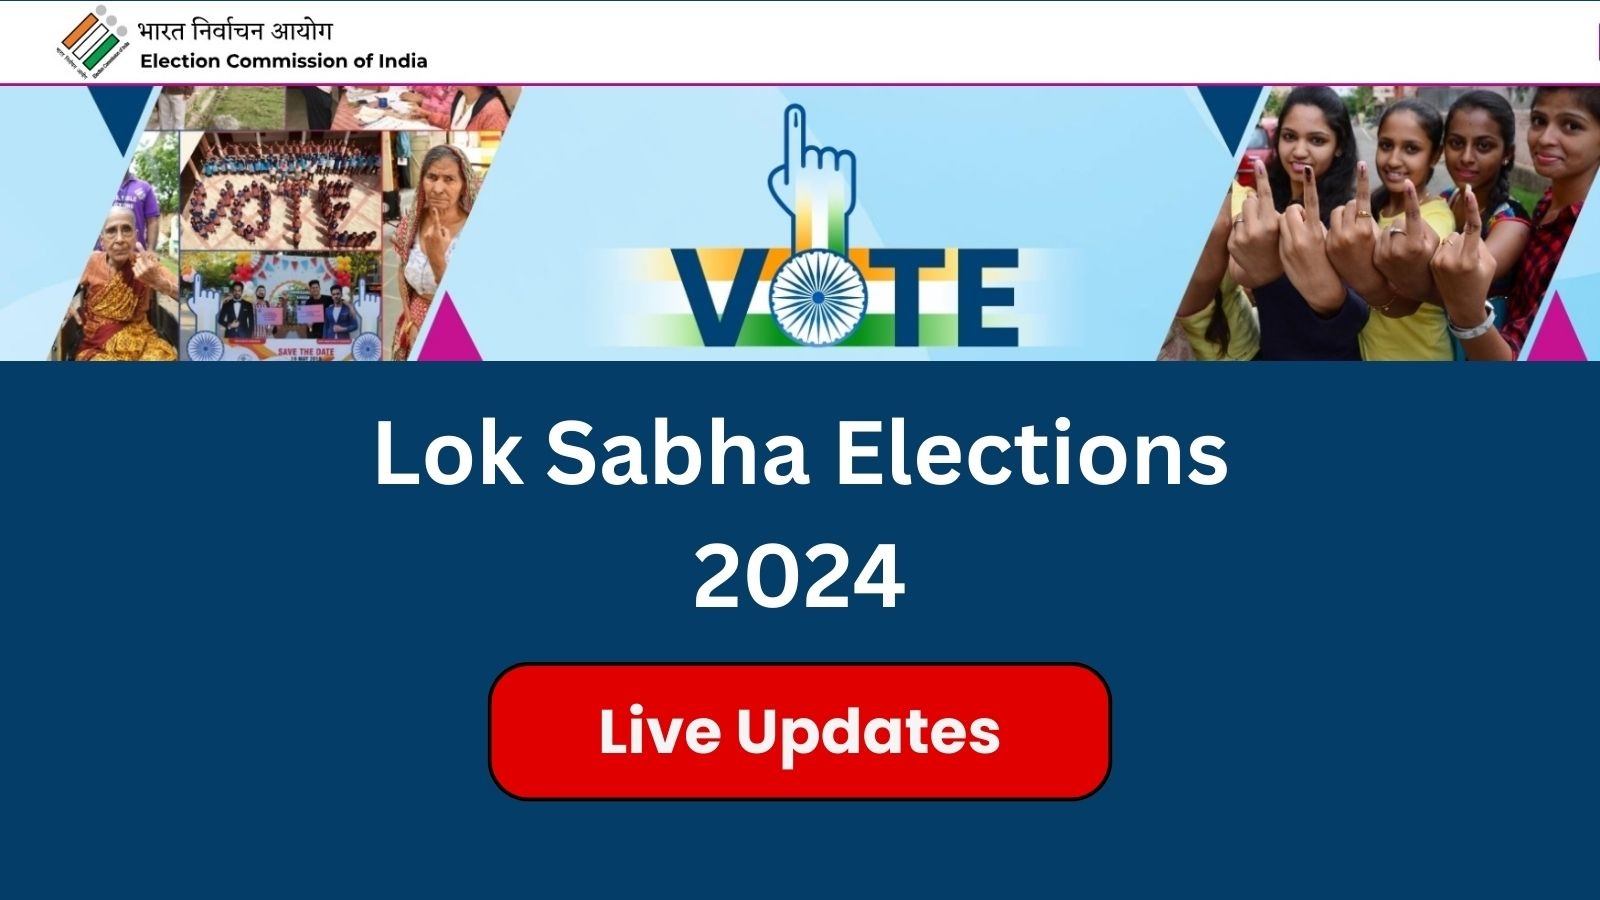 Elections 2024 In India Rivi Veriee